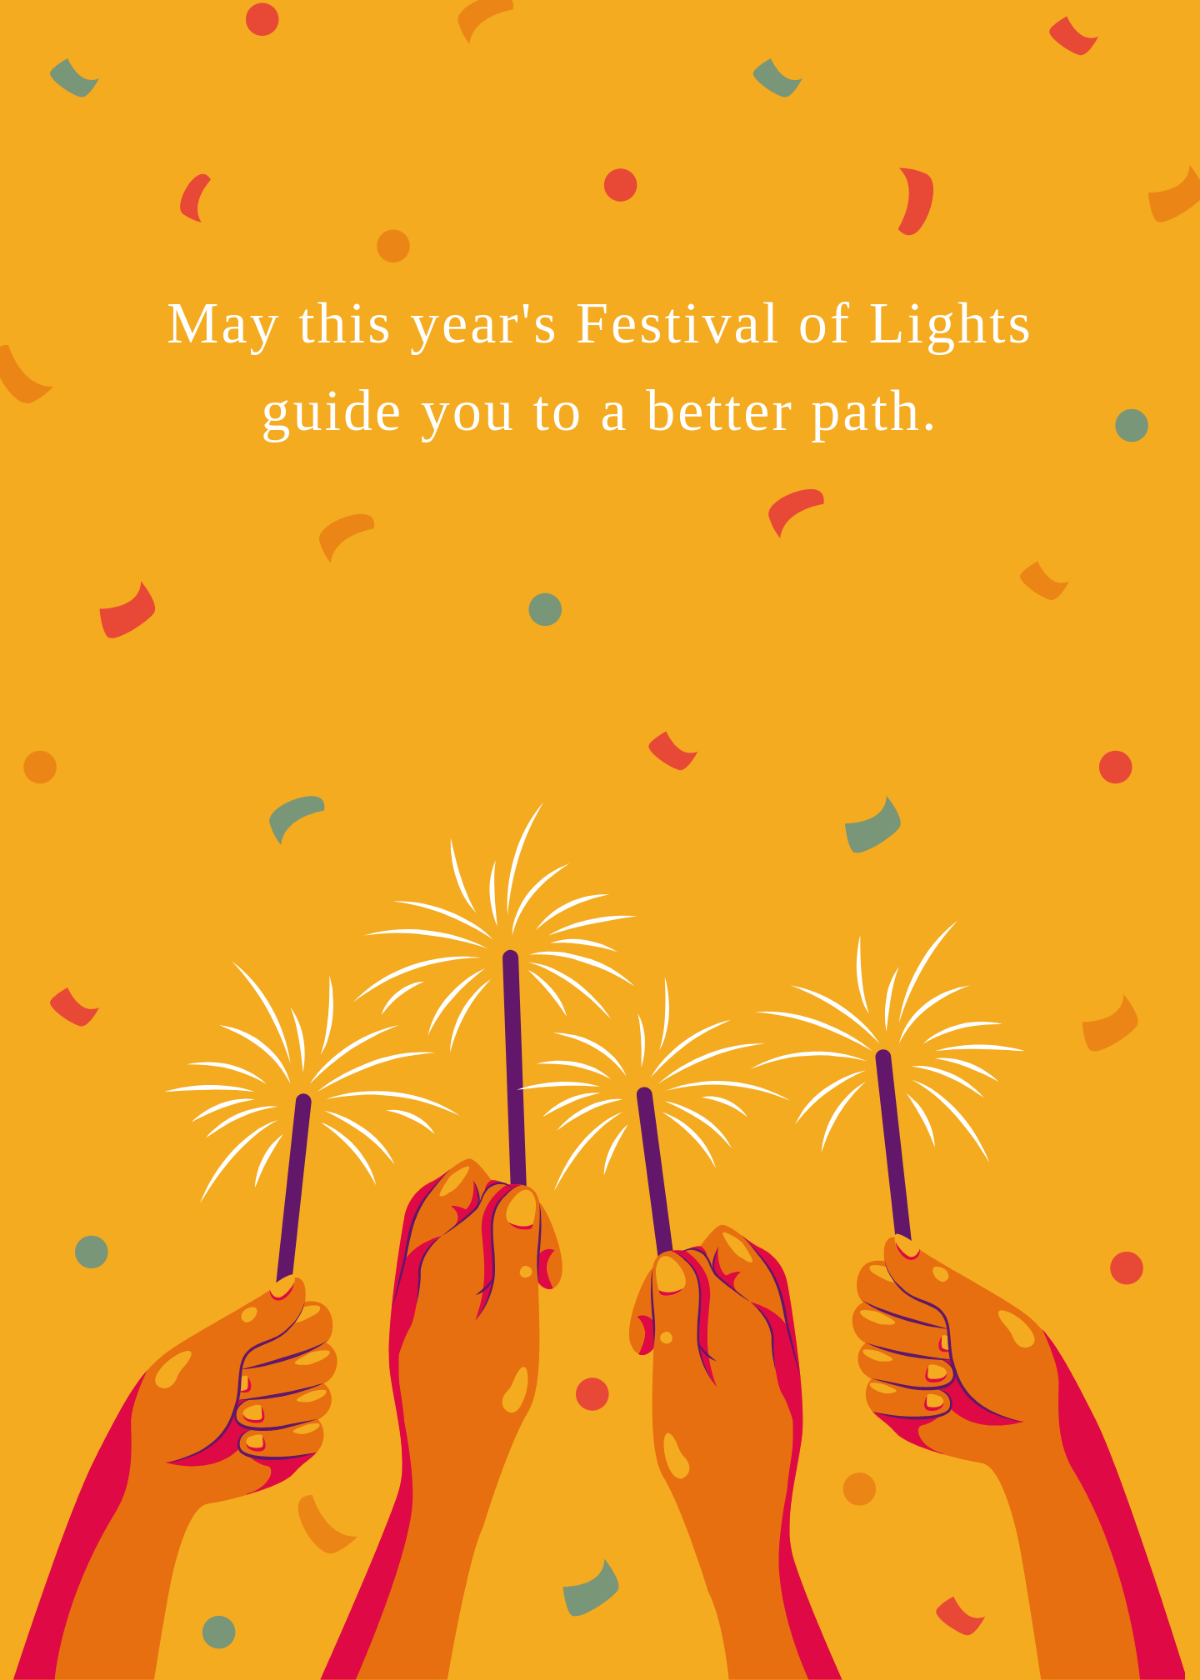 Festival of Lights Greeting Card Template